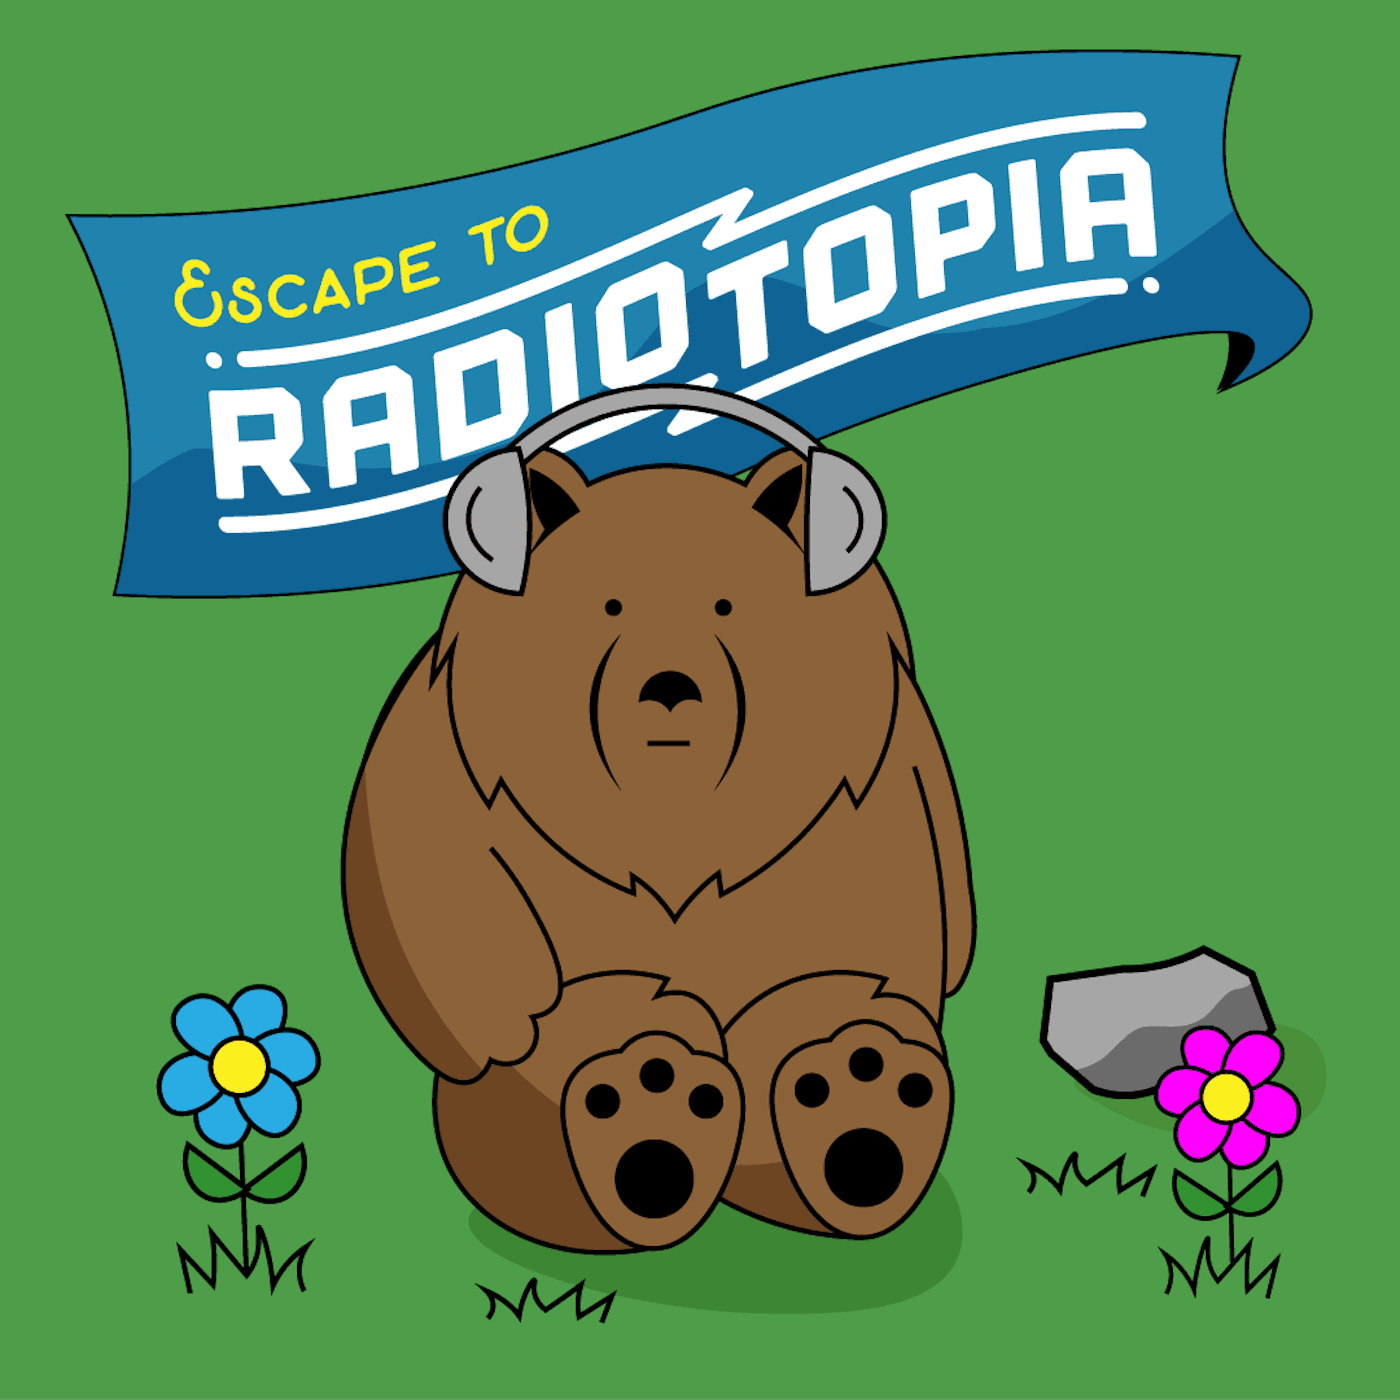 Thumbnail for "Escape to Radiotopia with Three New Shows".